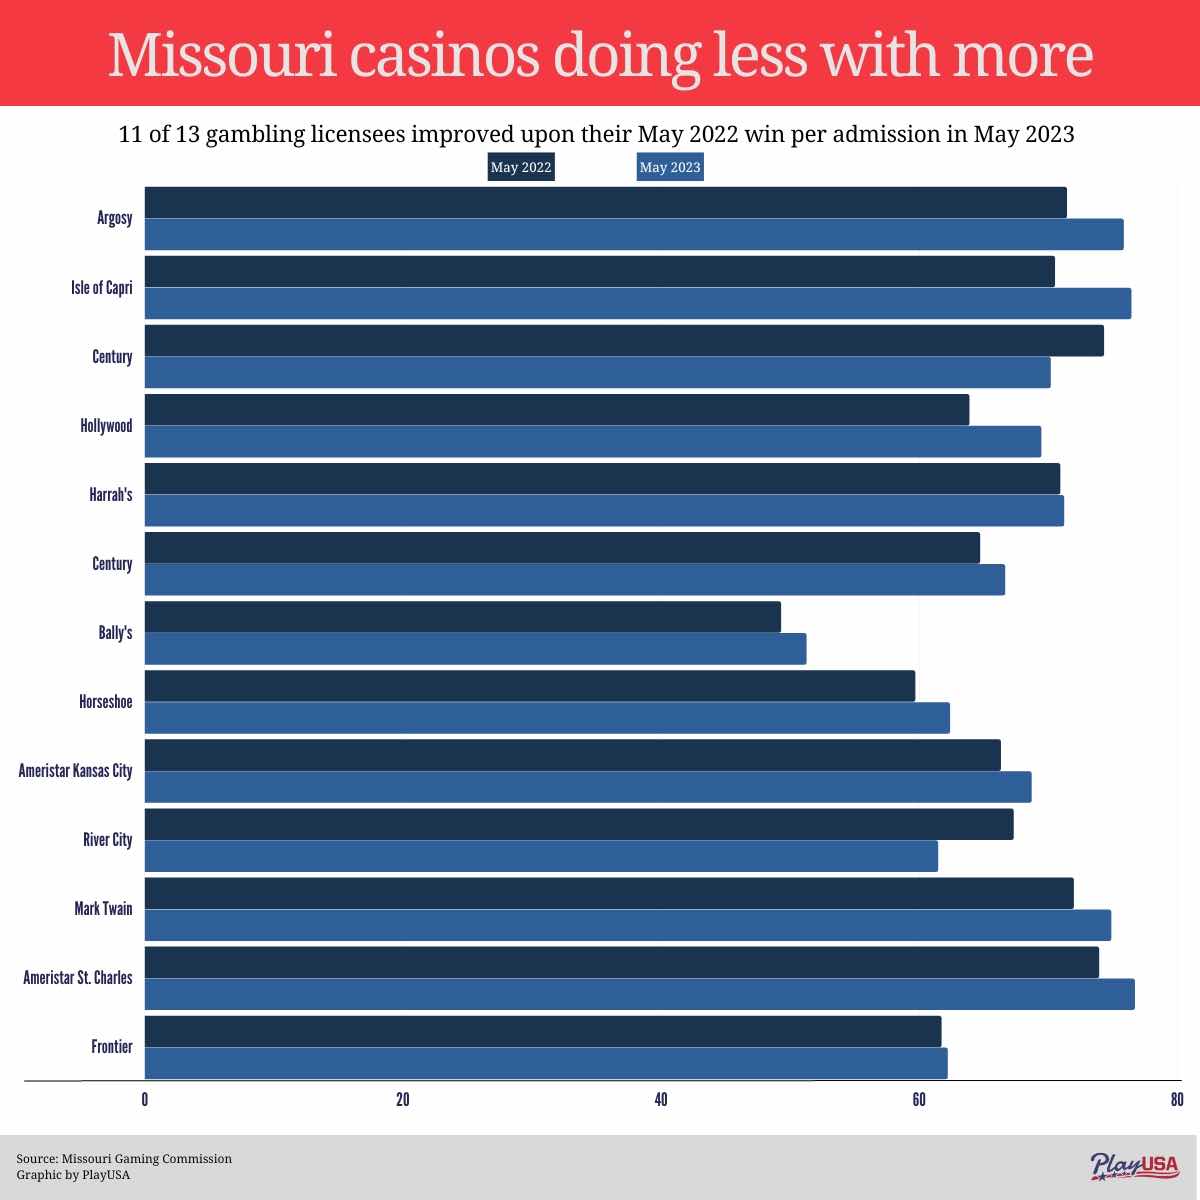 May 2022 Sees Missouri Casinos in Record-Breaking Competition